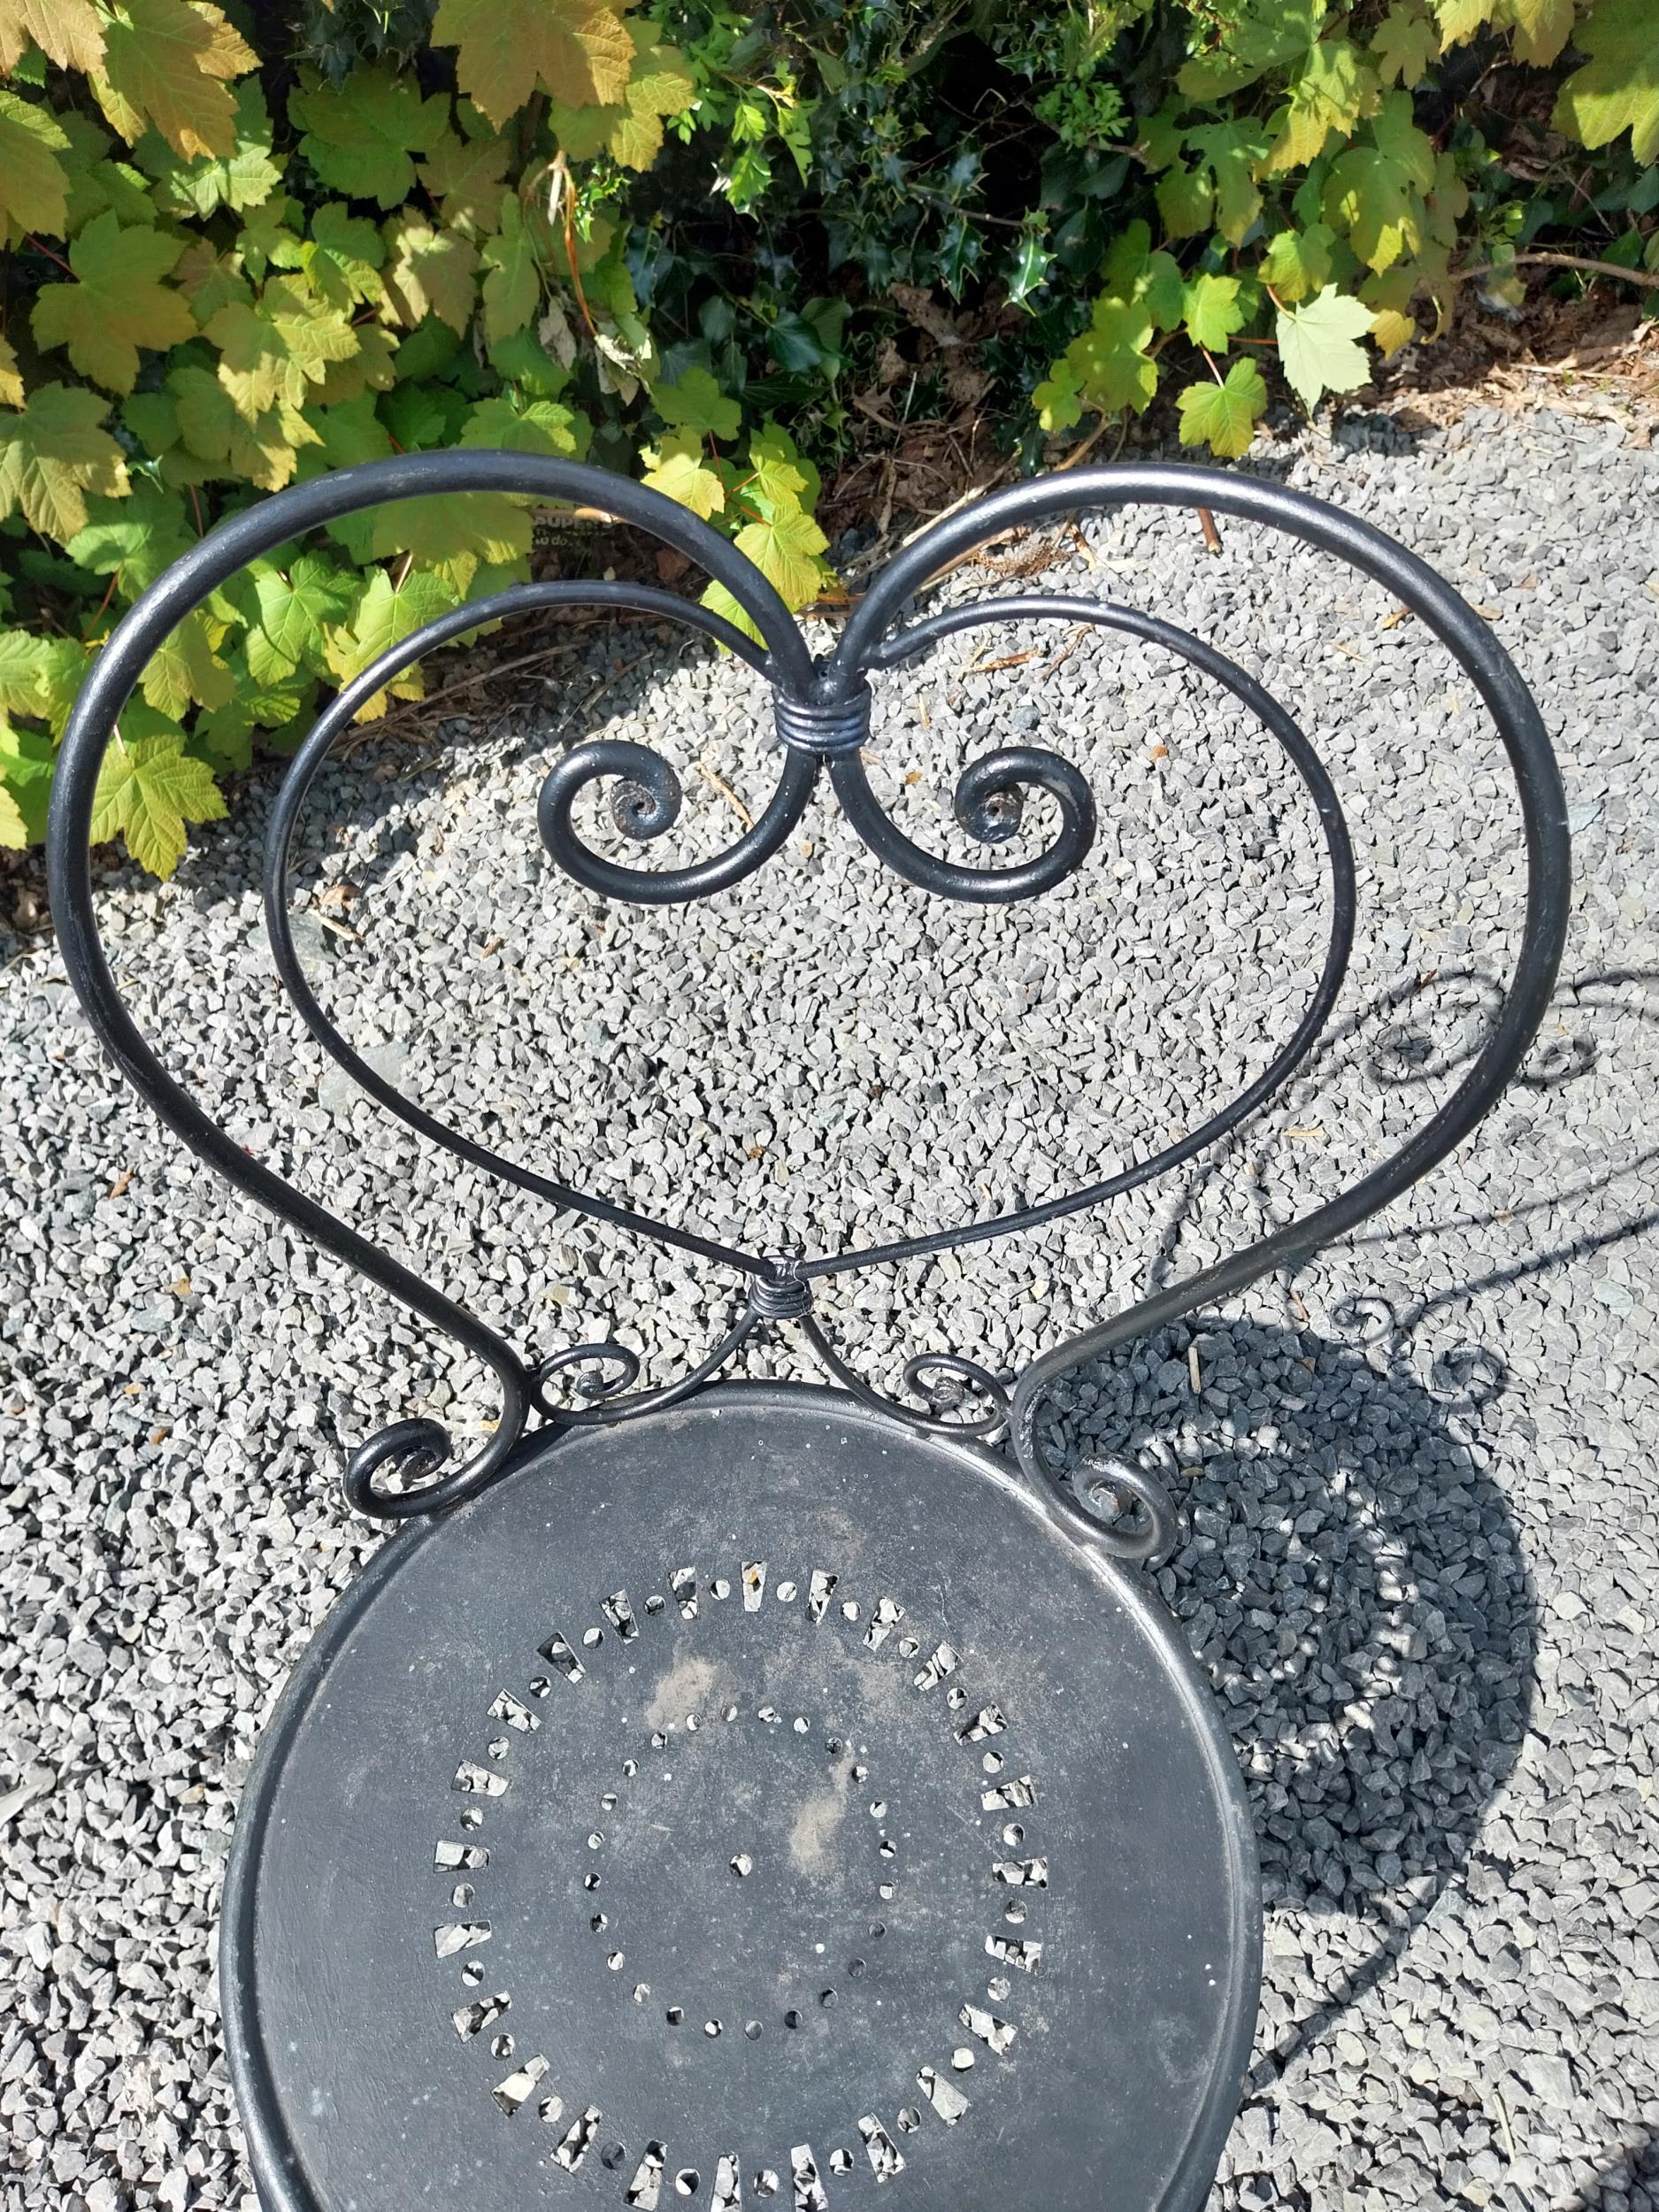 Wrought iron garden table with three matching chairs {Tbl. 65 cm H x 65 cm Dia. and Chairs 82 cm H x - Image 9 of 11